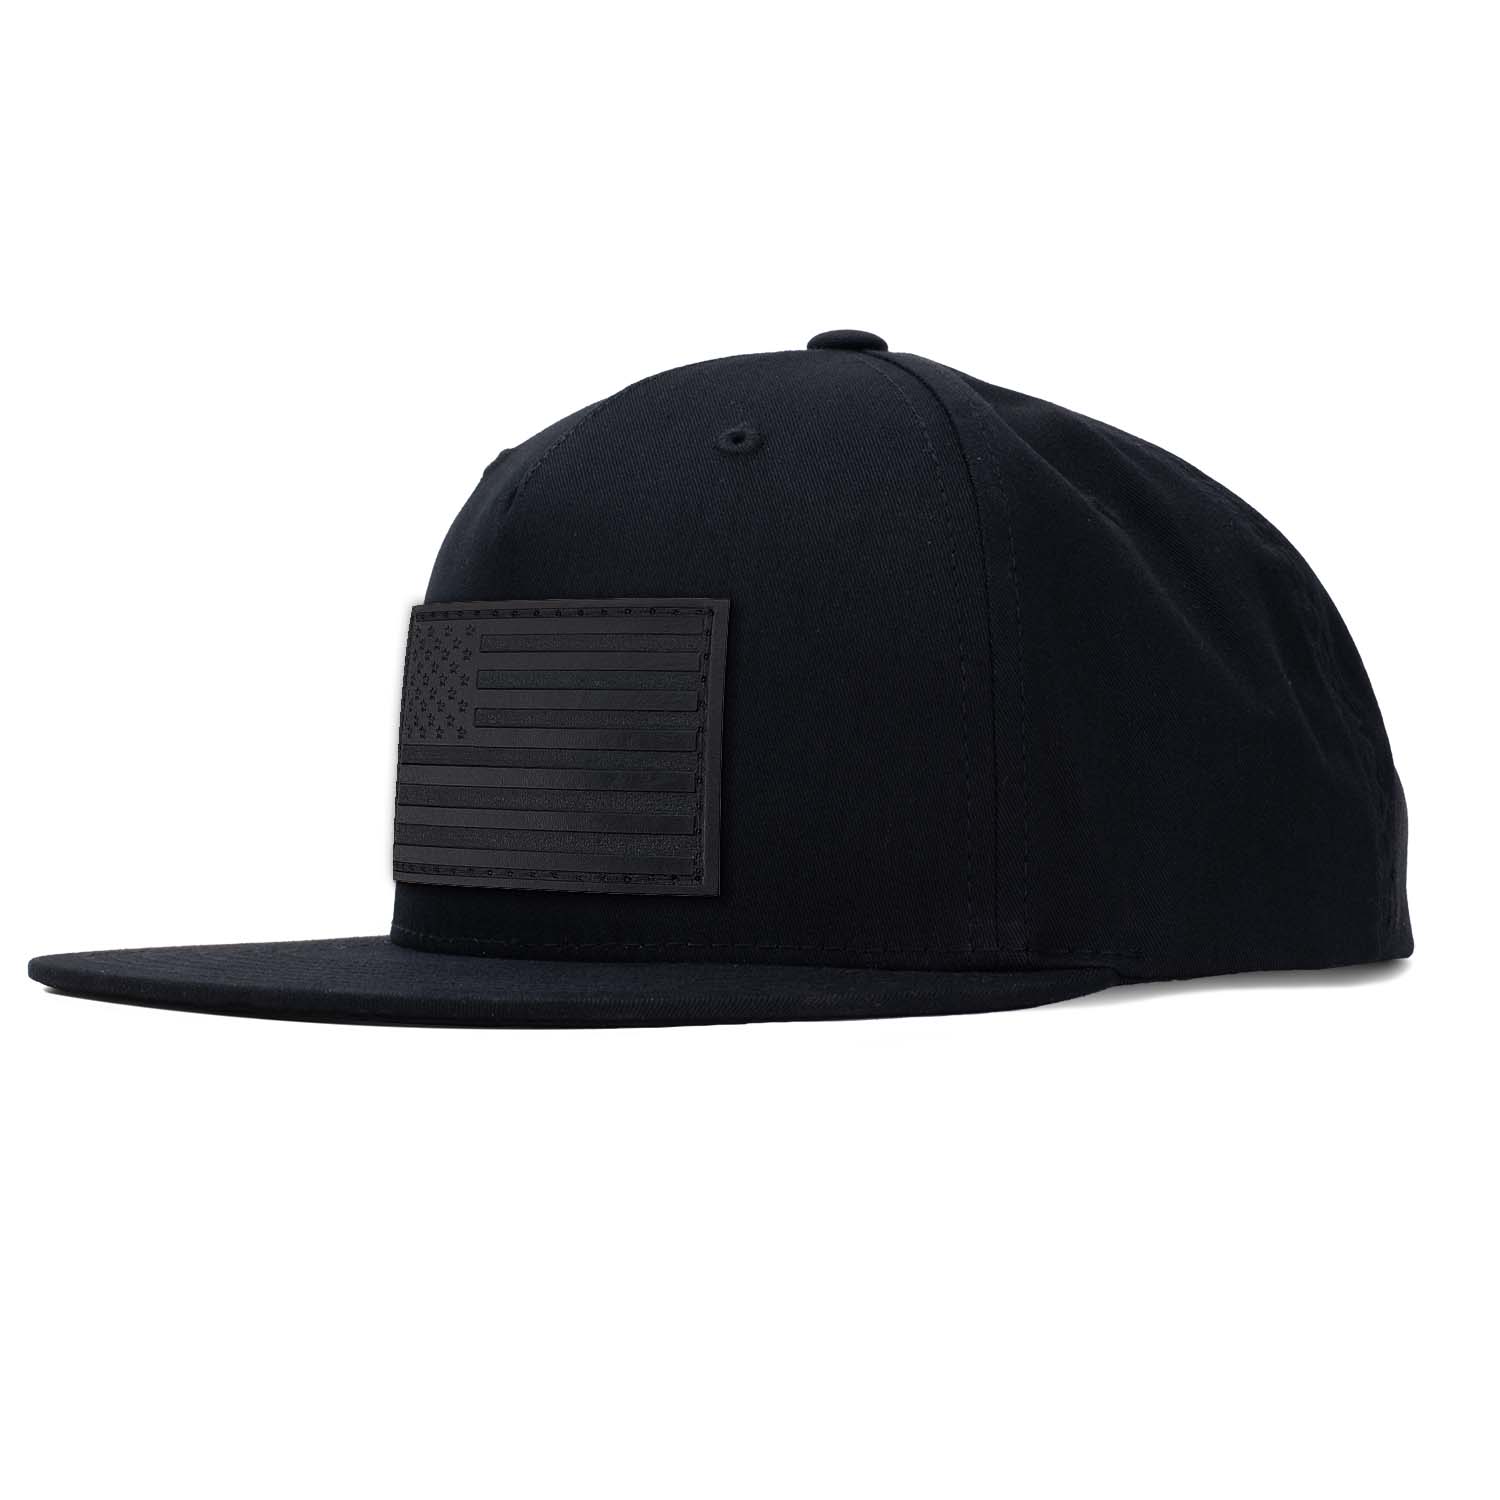 Revolution Mfg black all poly/cotton fabric pinch front flat bill snapback with our black full grain leather American flag patch